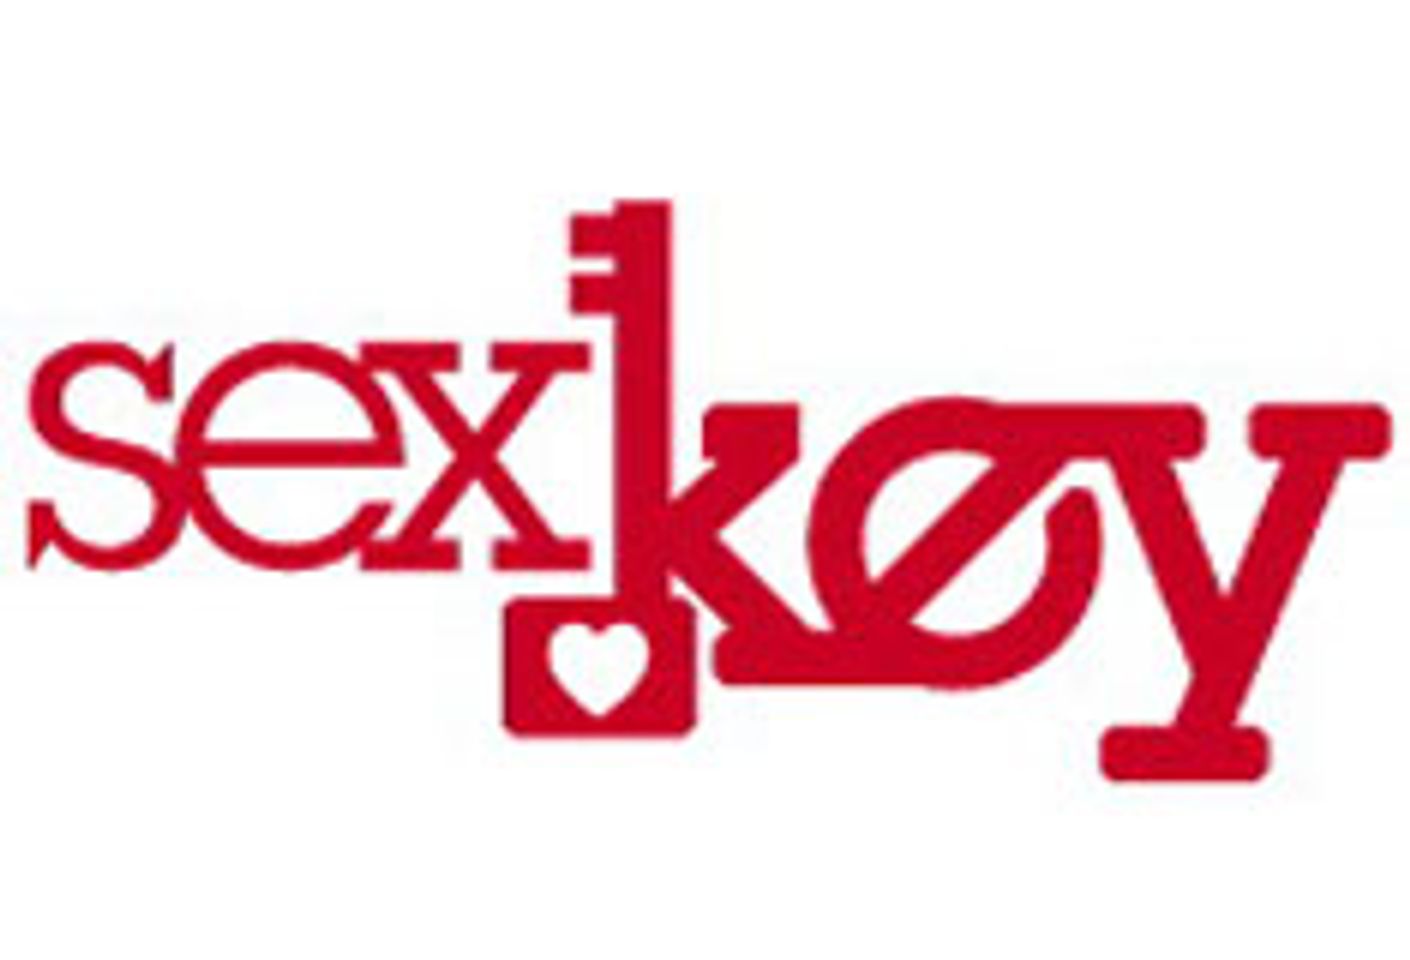 Sexkey Unleashes AgeVerificationService.com and Suite of Marketing Tools